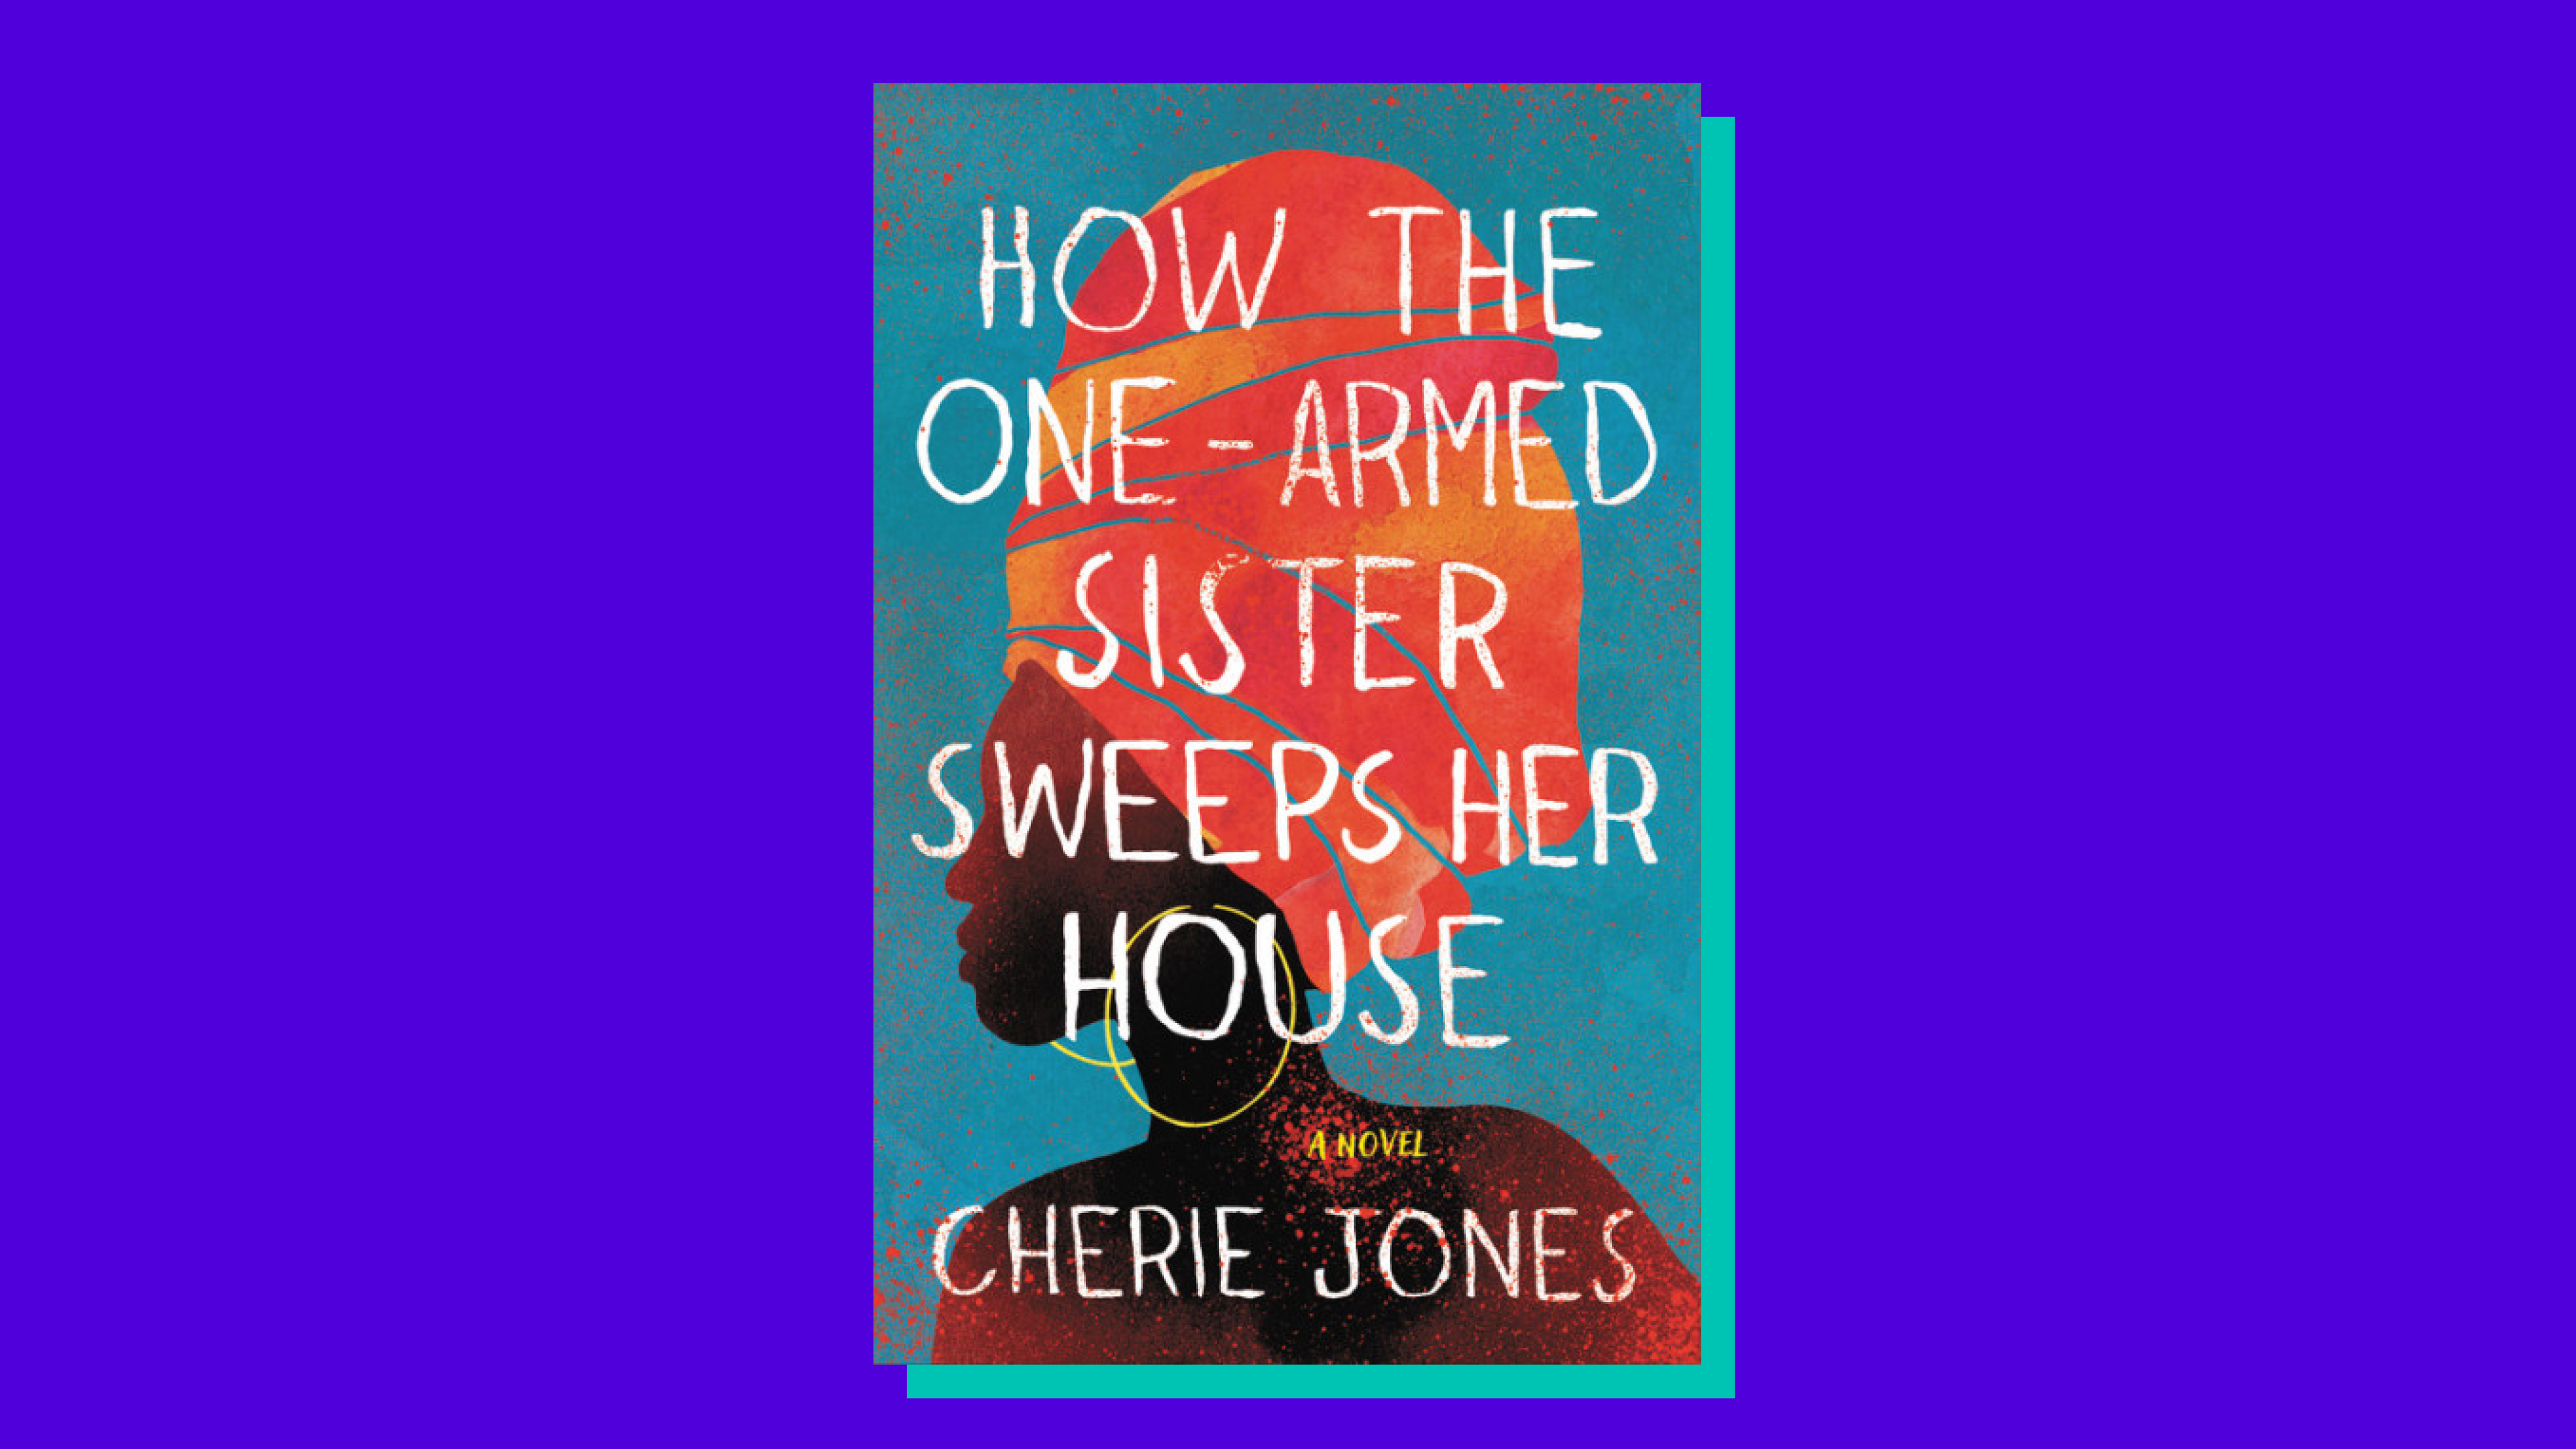 “How the One-Armed Sister Sweeps Her House” by Cherie Jones